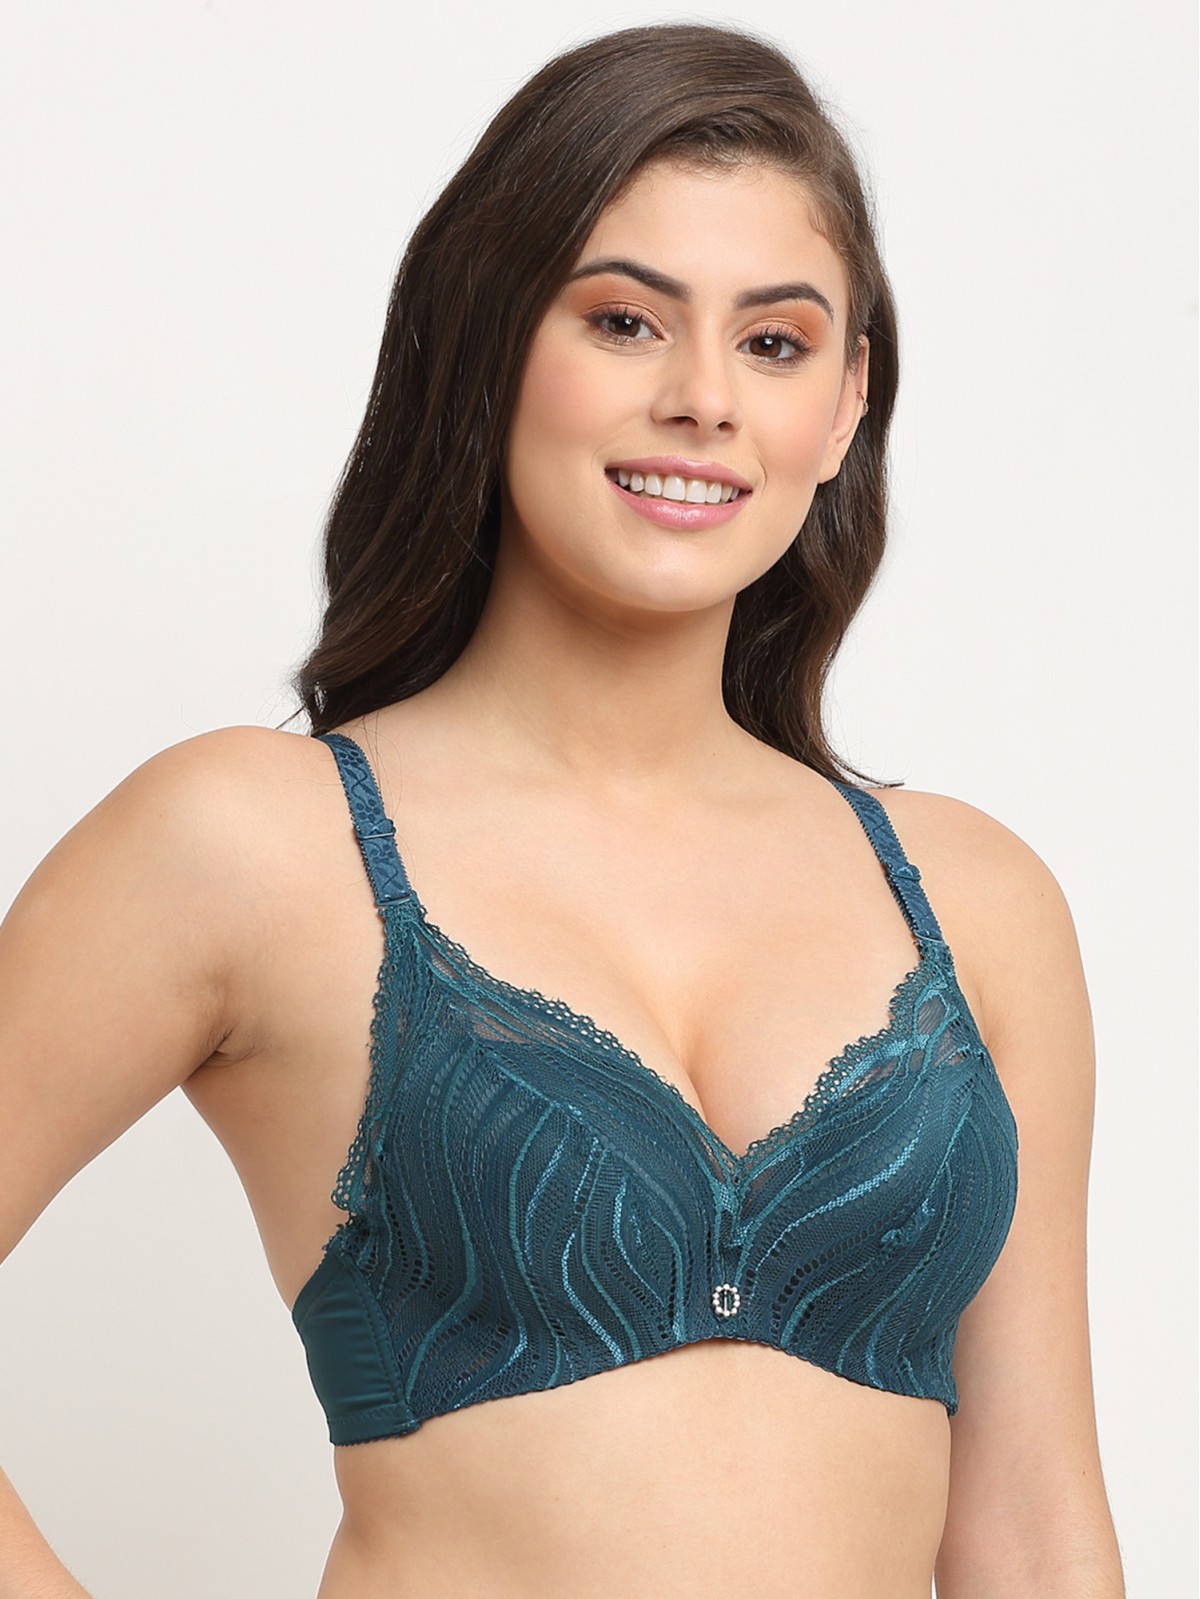 Chic and Sleek Lace Brassiere K1501B